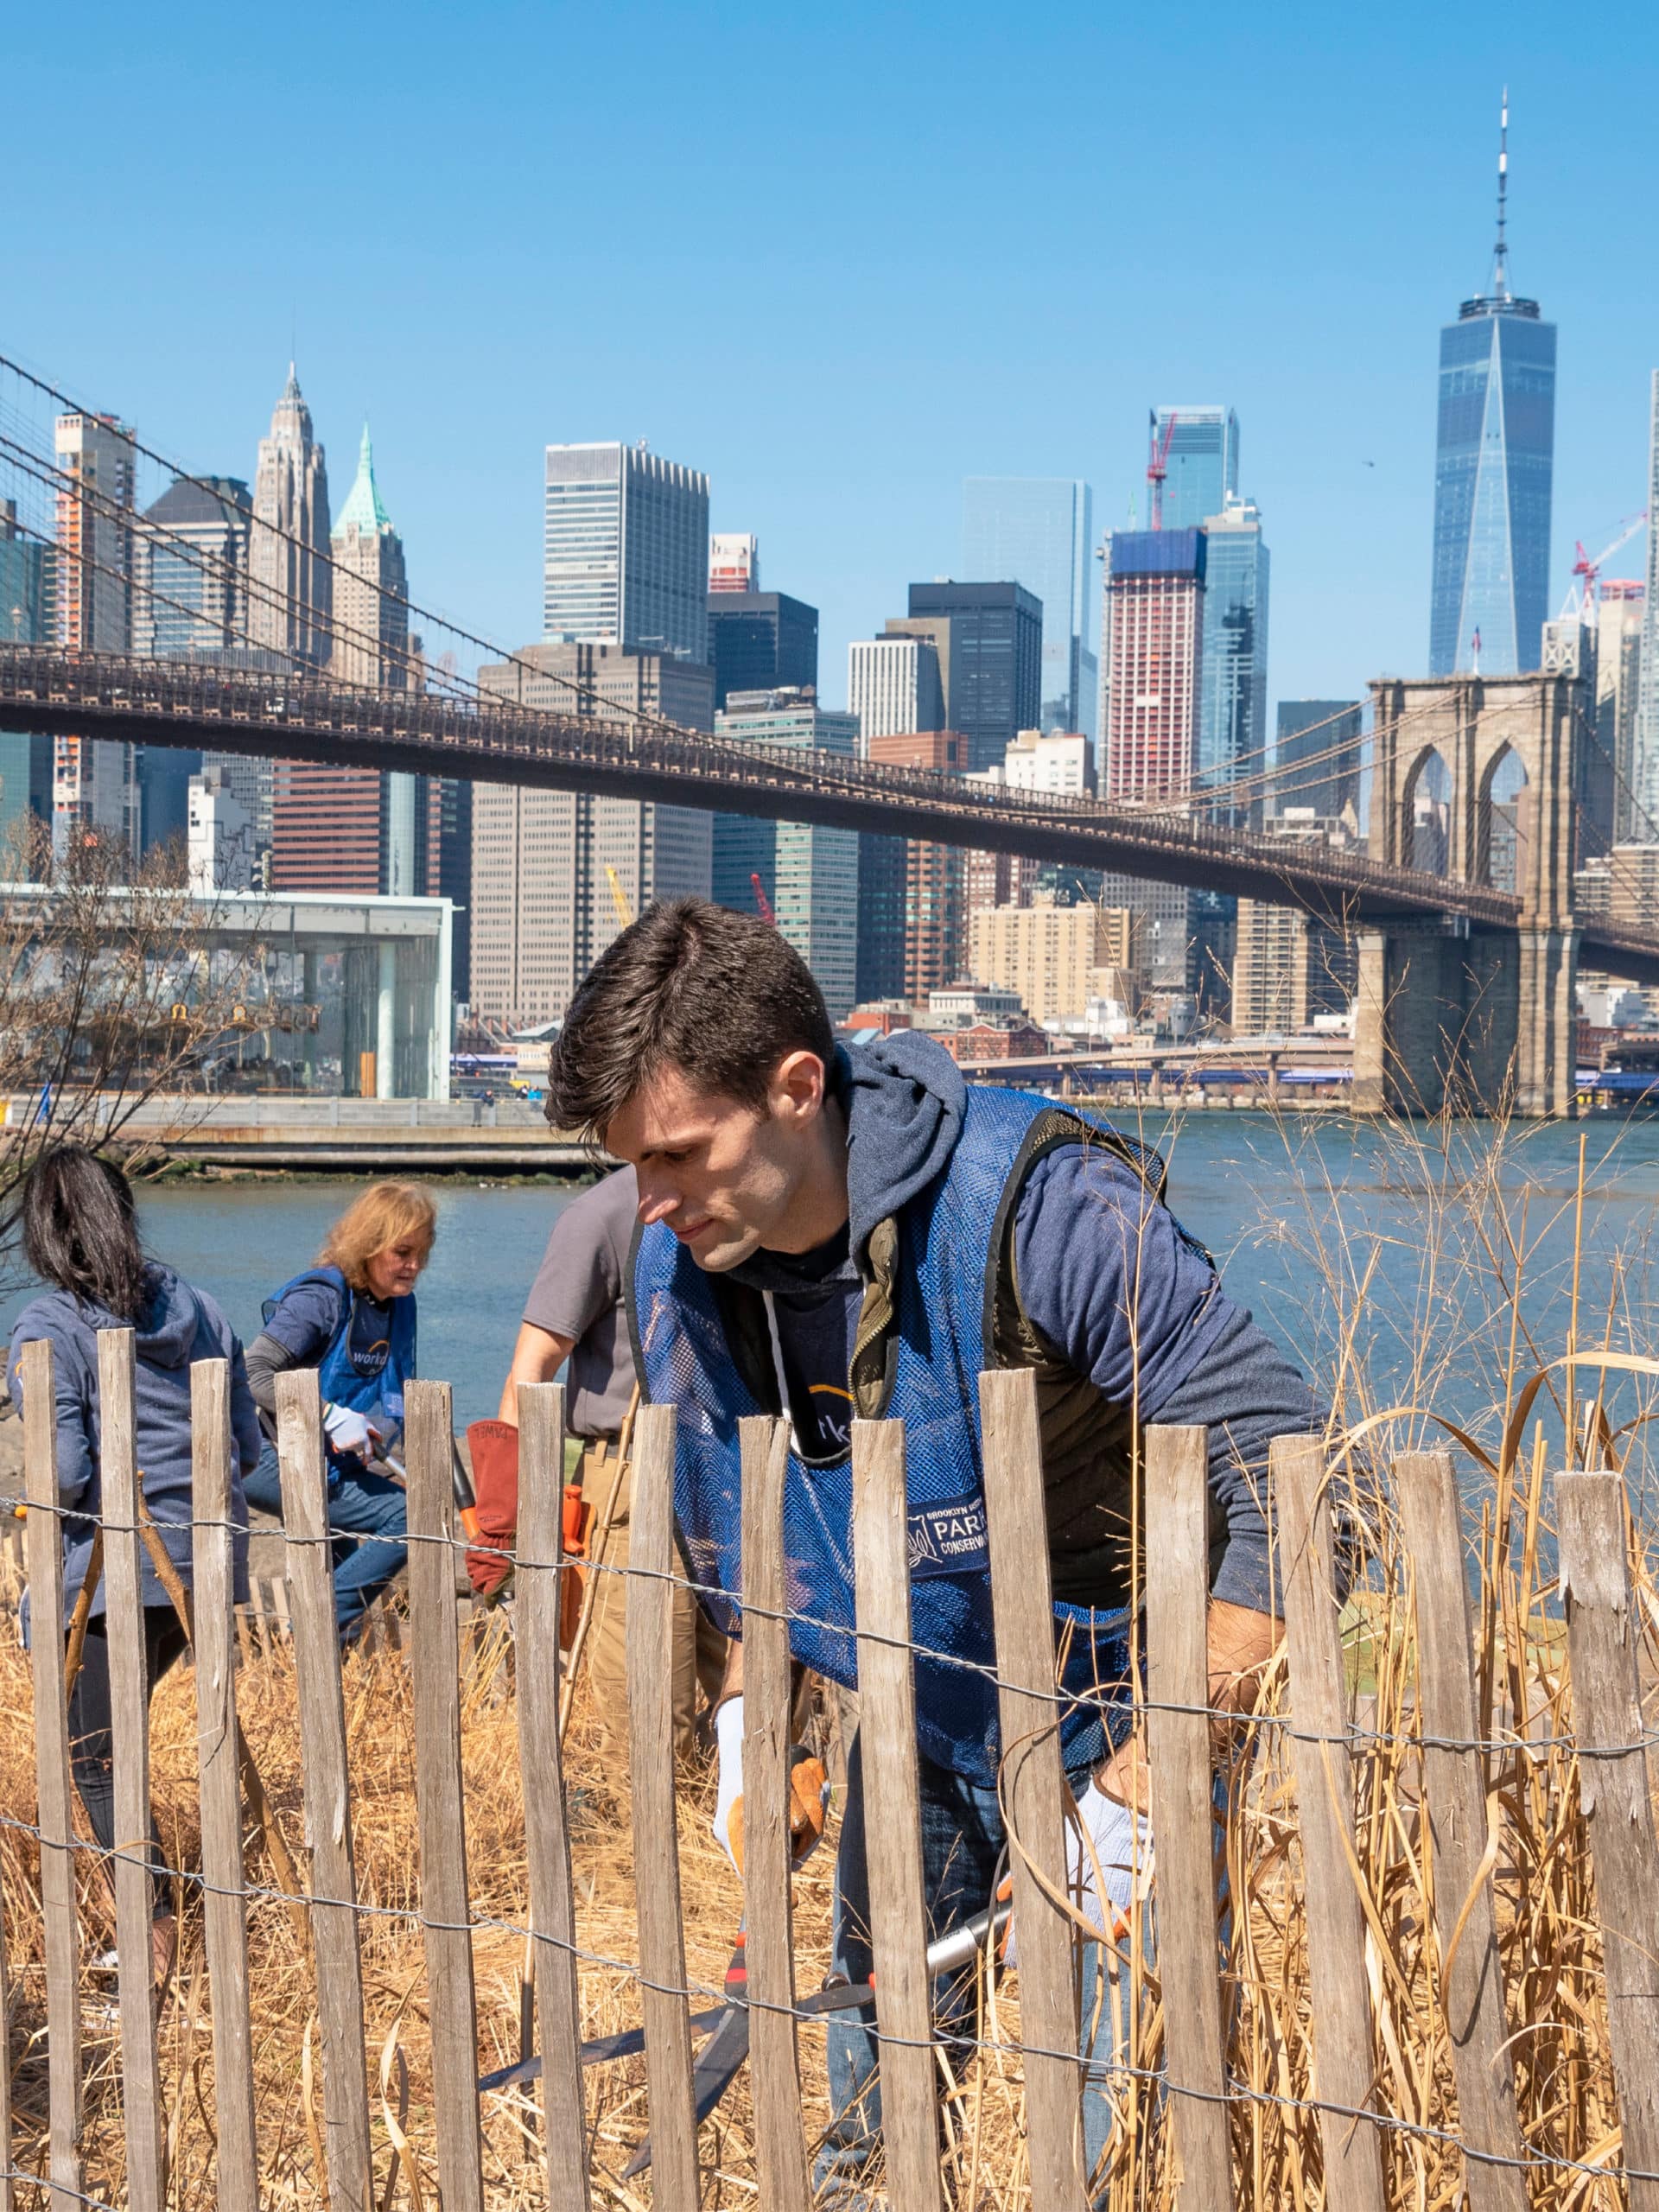 Volunteer by fence trimming long grasses. The Brooklyn Bridge is seen in the background.